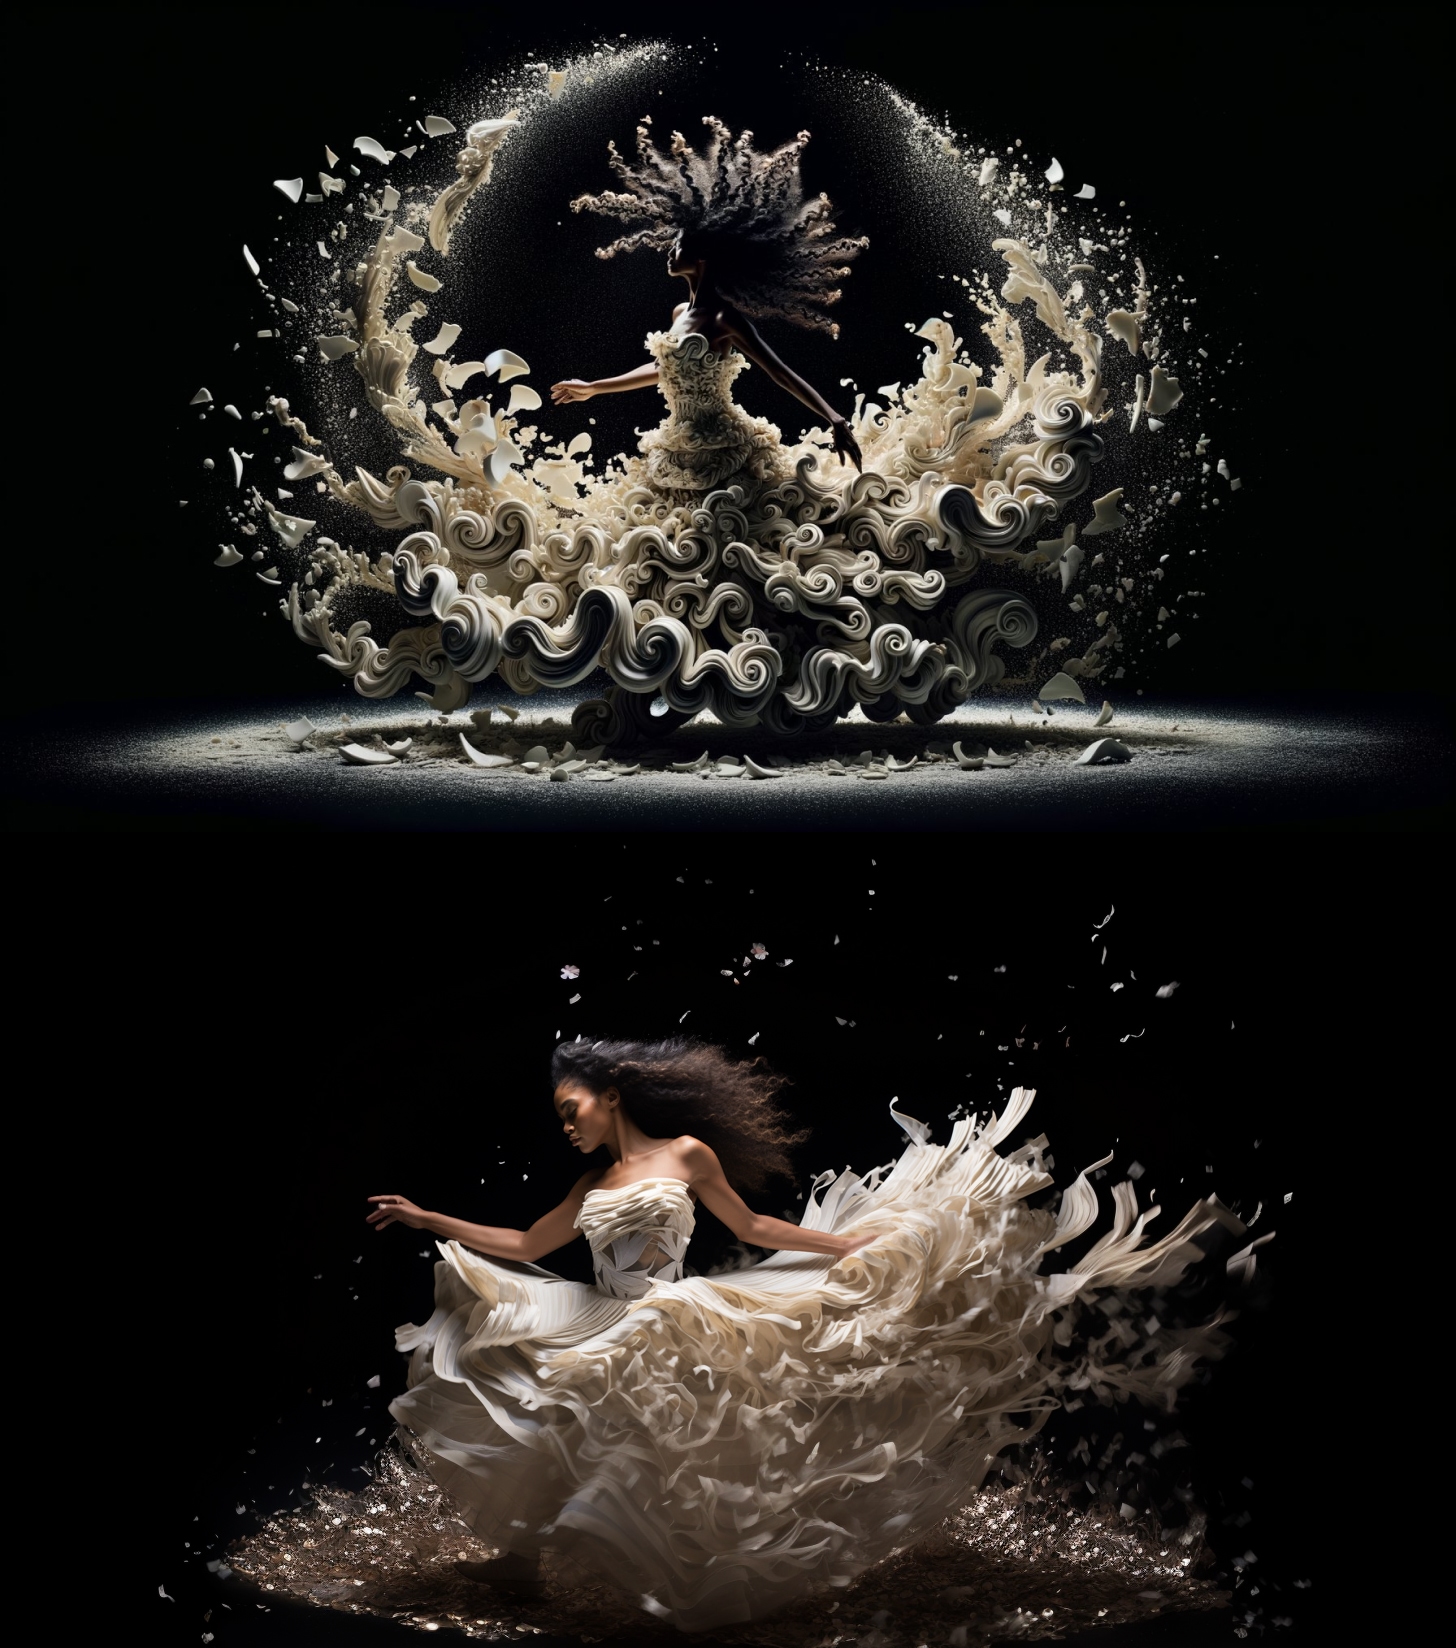 DALL-E 3 (top) vs Midjourney (bottom): In front of a deep black backdrop, a figure of middle years, her Tongan skin rich and glowing, is captured mid-twirl, her curly hair flowing like a storm behind her. Her attire resembles a whirlwind of marble and porcelain fragments. Illuminated by the gleam of scattered porcelain shards, creating a dreamlike atmosphere, the dancer manages to appear fragmented, yet maintains a harmonious and fluid form.